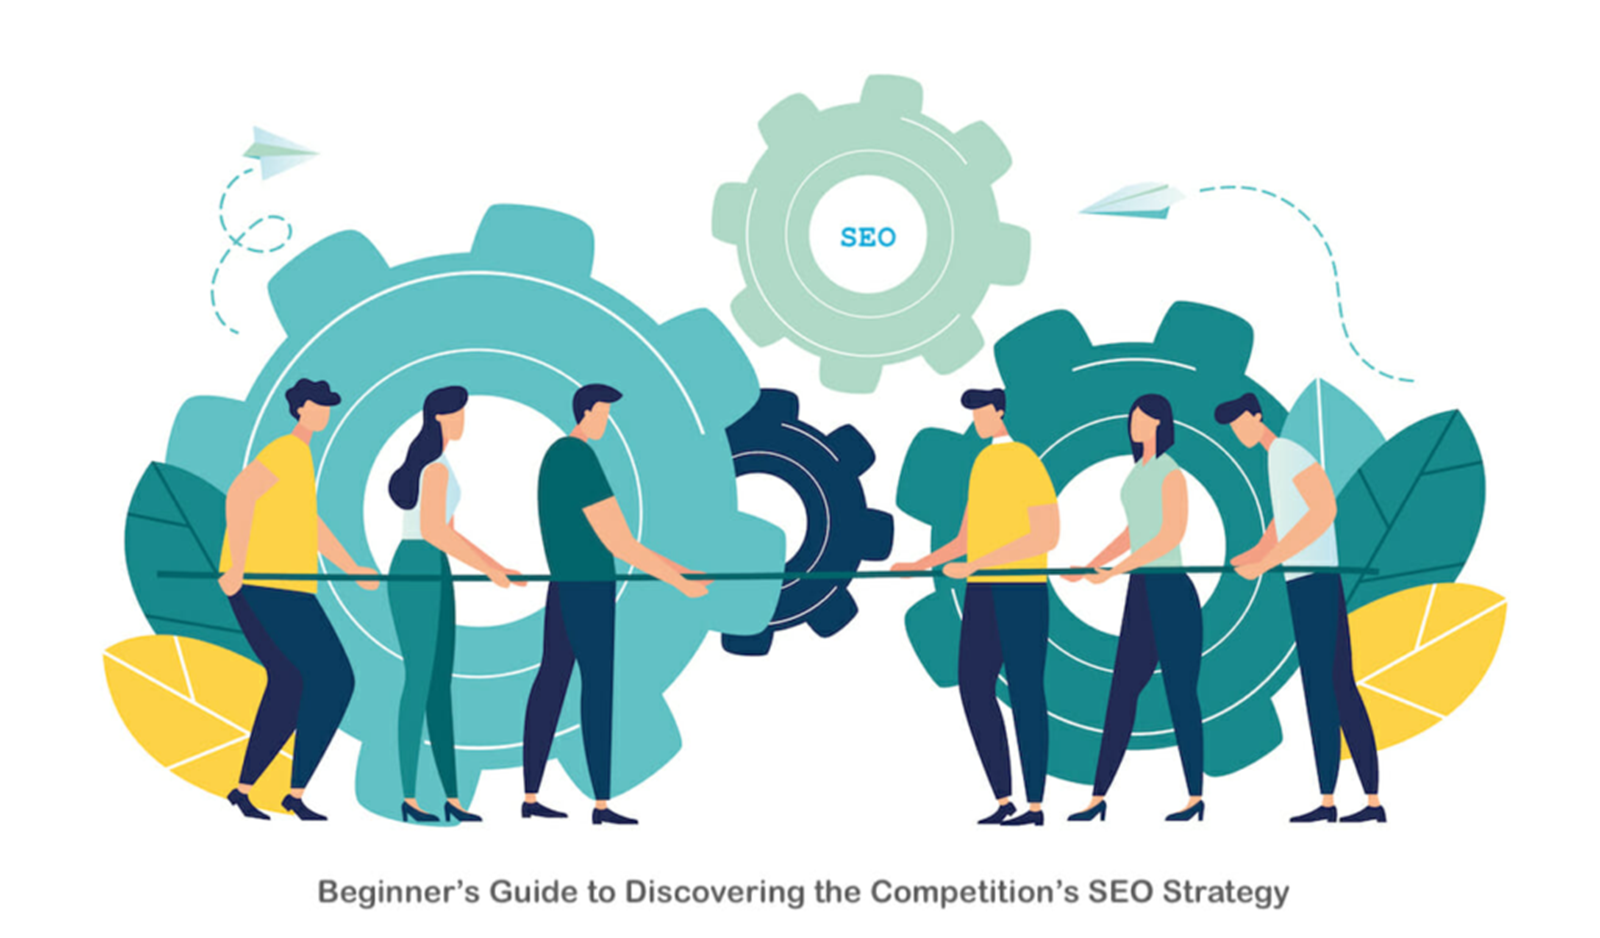 SEO Agency approach in Competitor Analysis